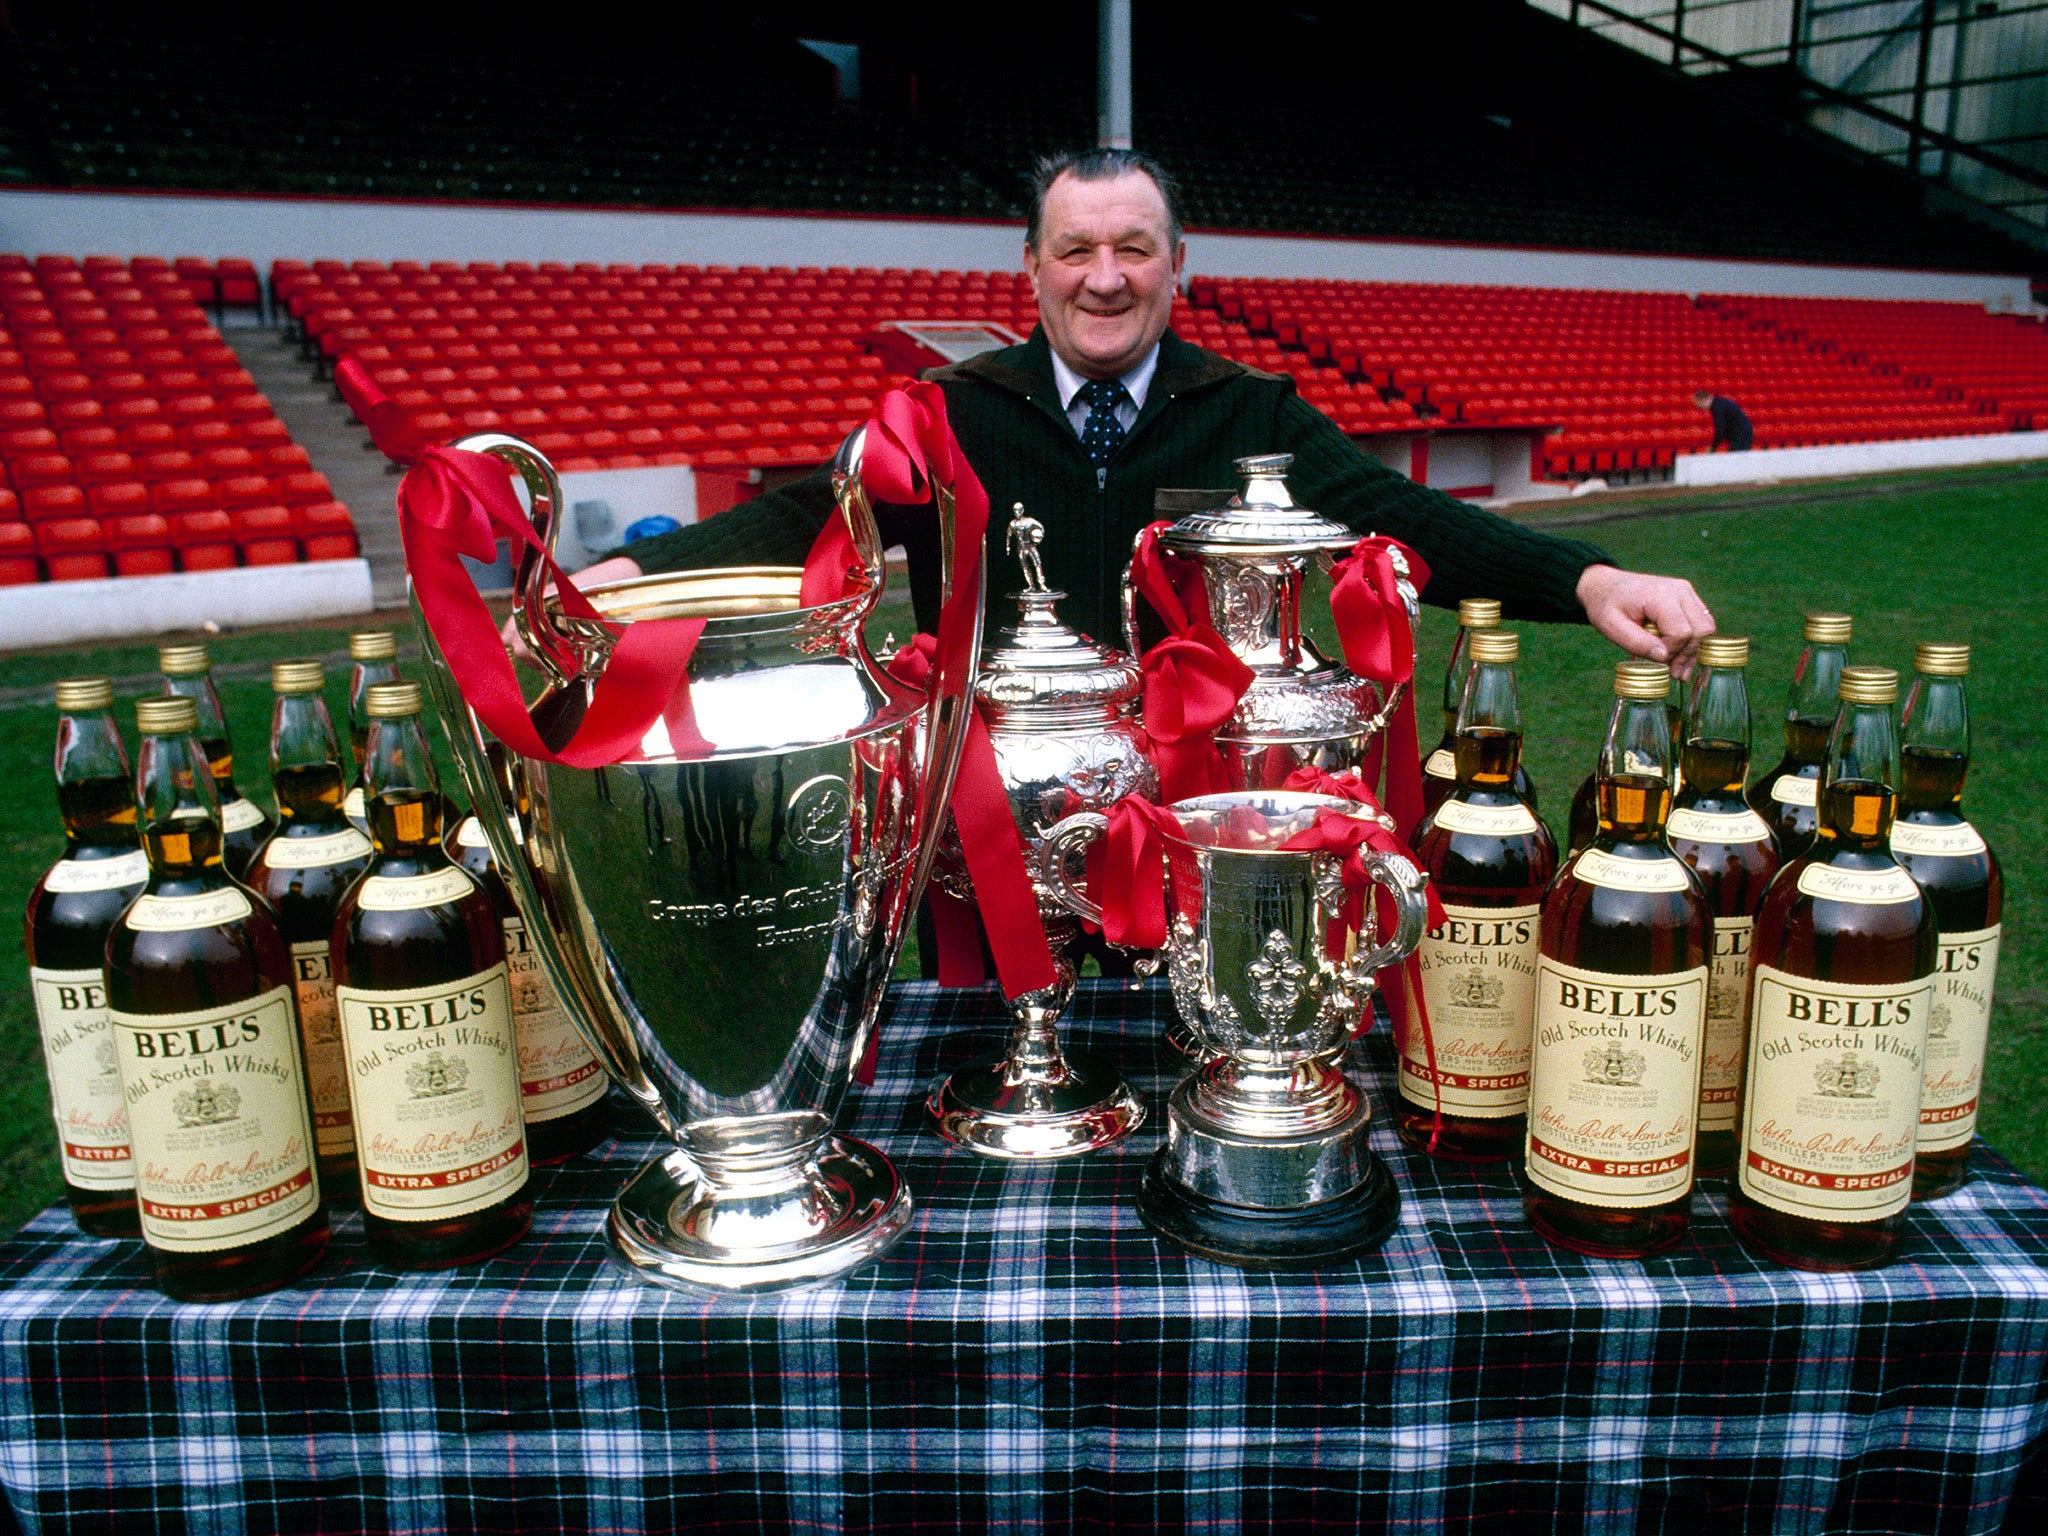 Bob Paisley was not a great communicator, but as he spoke less, he listened more